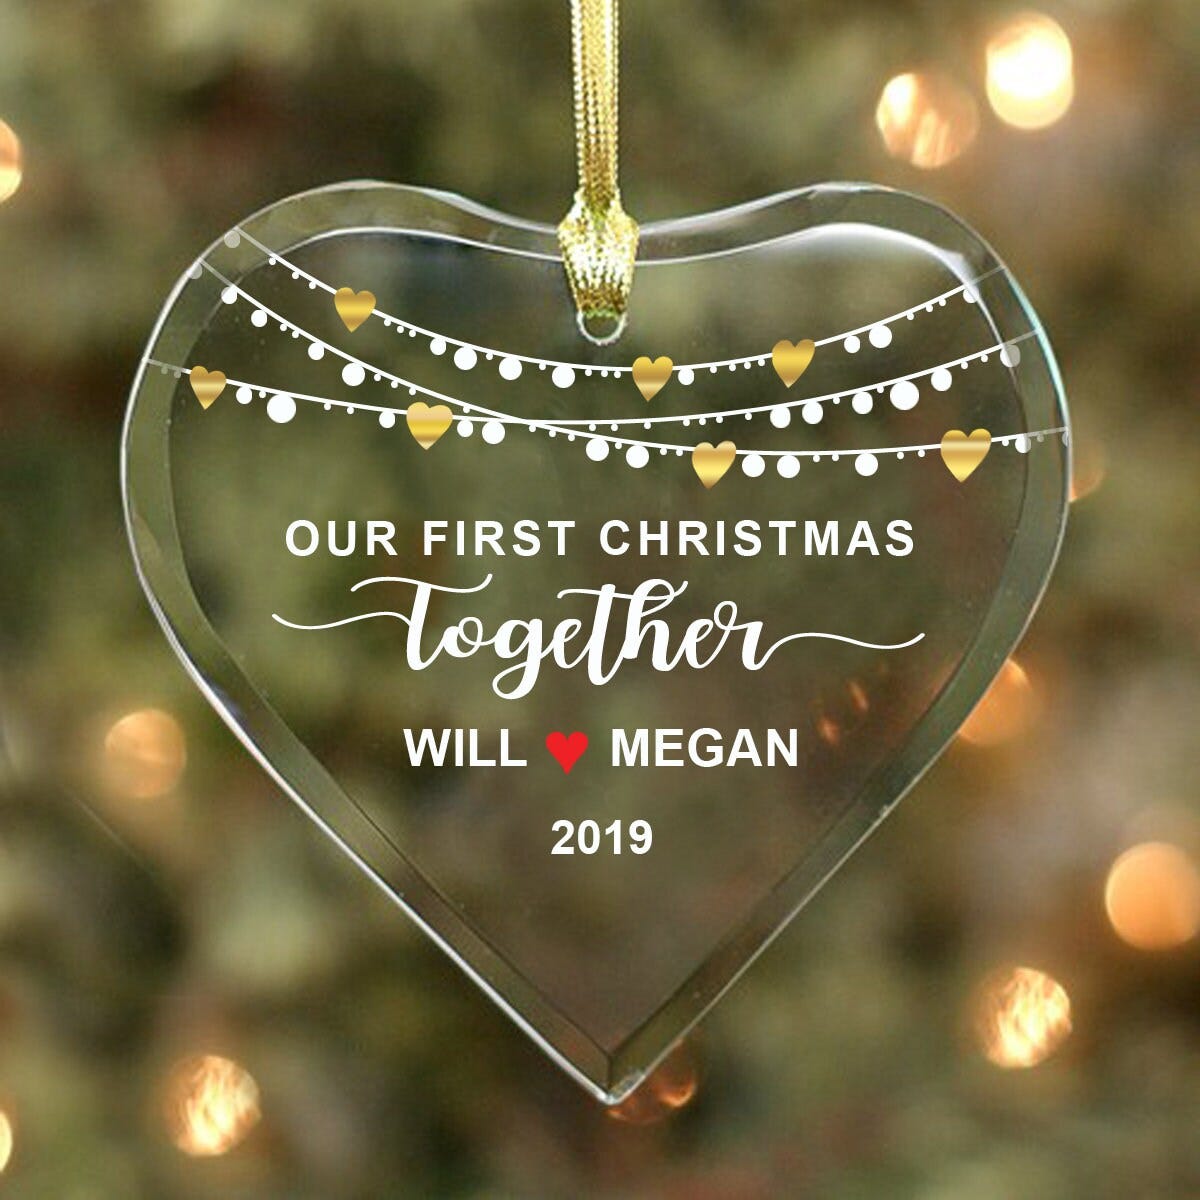 Our First Christmas Together - Couple’s Glass Heart Ornament - Personalized with Names & Year